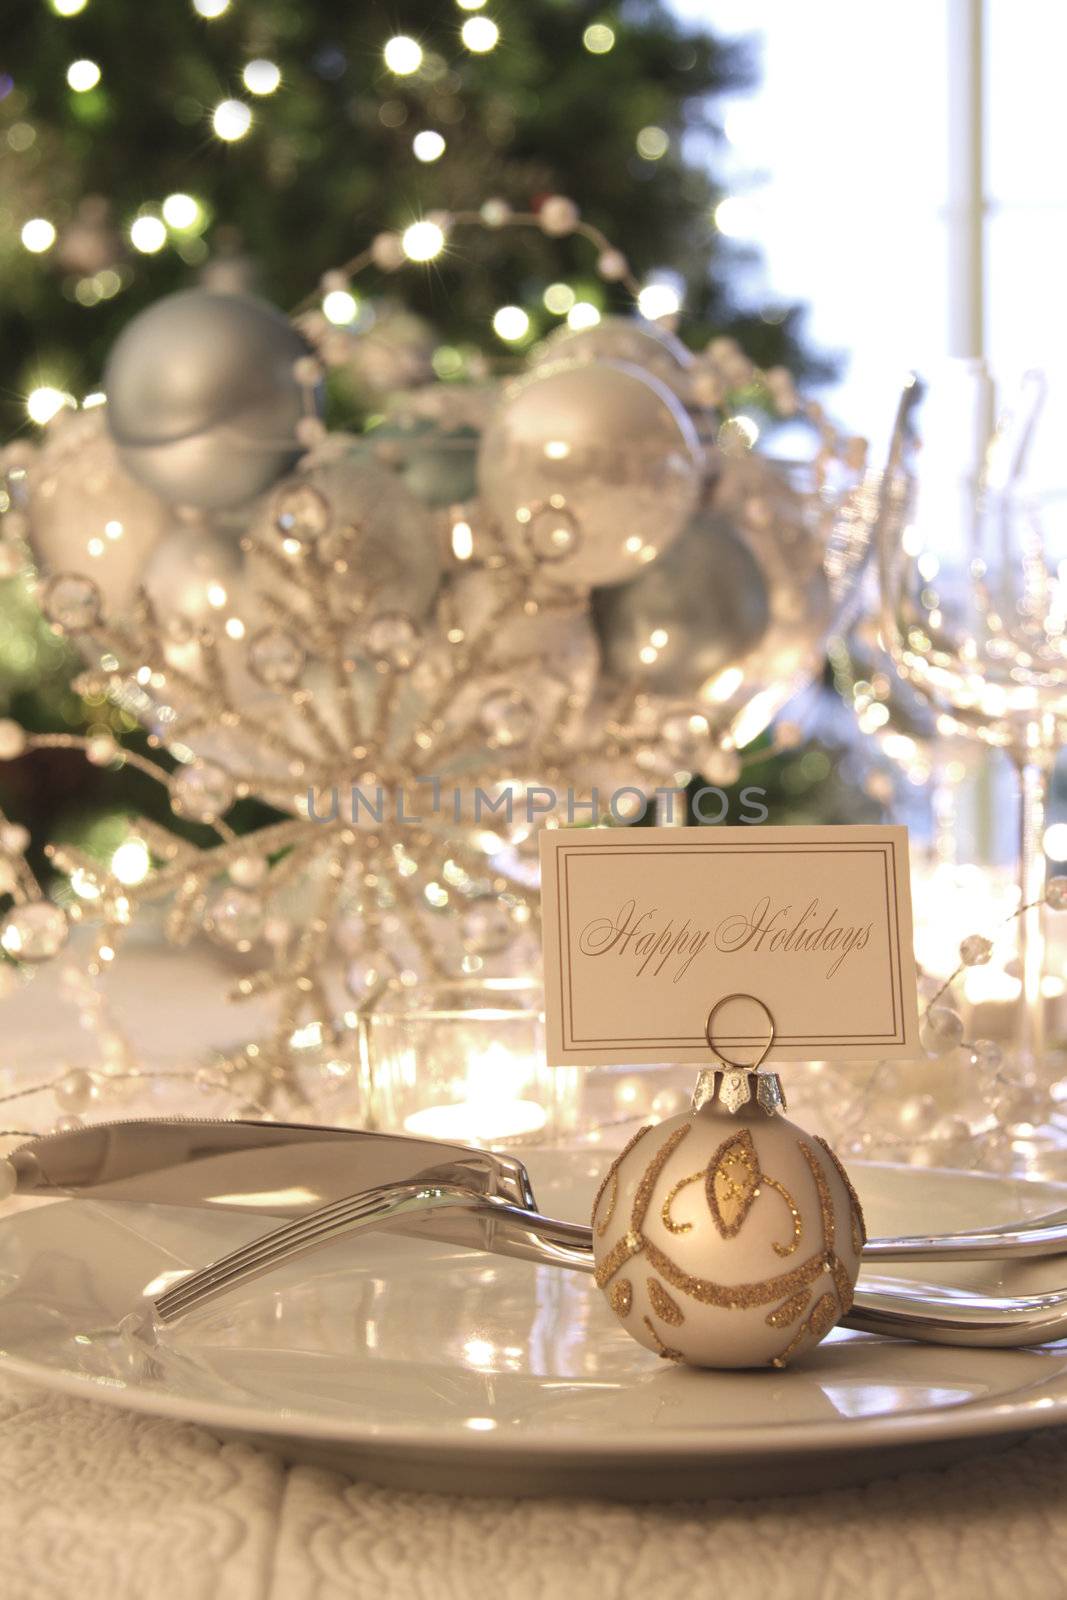 Elegantly lit holiday dinner table with focus on place card